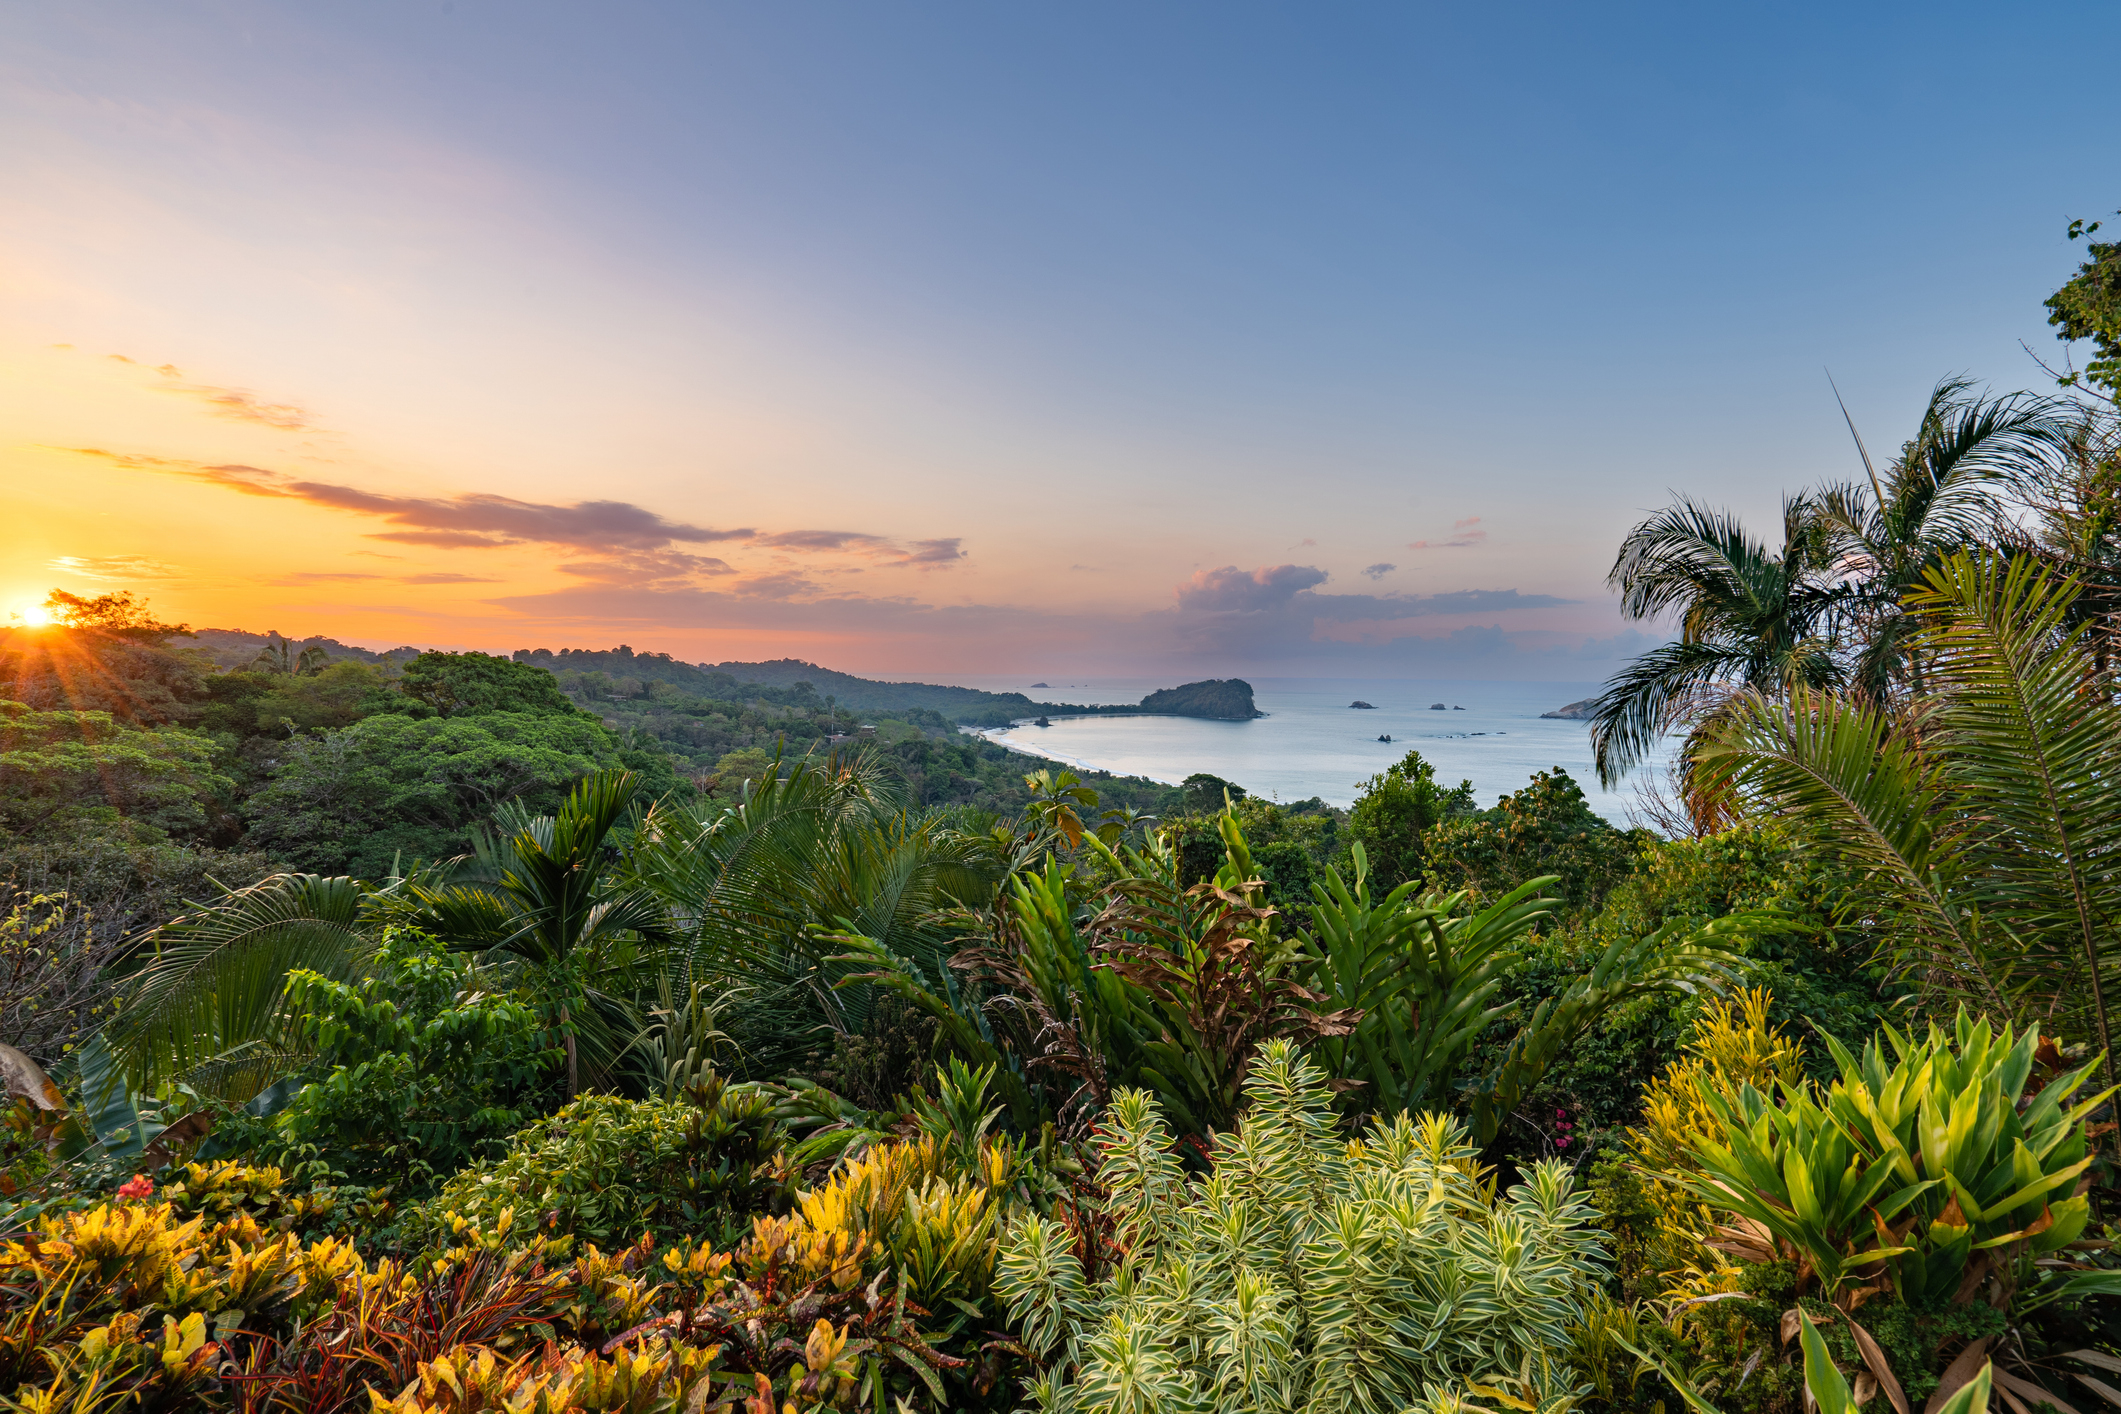 Tropical landscape with dense foliage and ocean view at sunrise